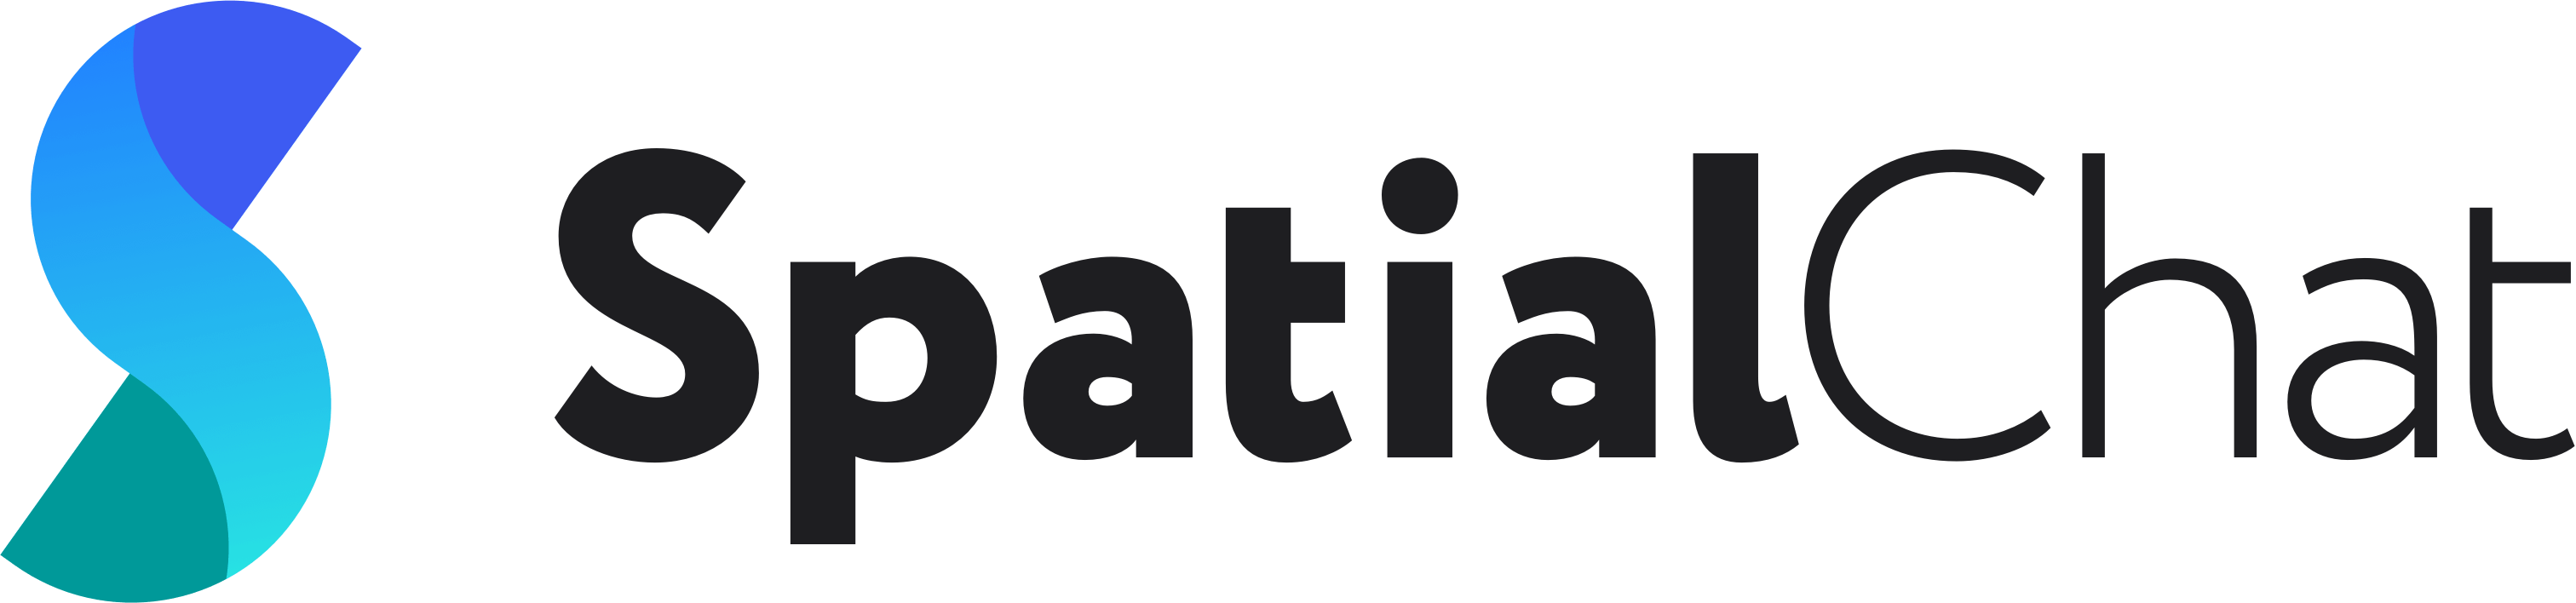 SpatialChat — Gold Sponsor of the virtual Agile Camp Berlin 2021